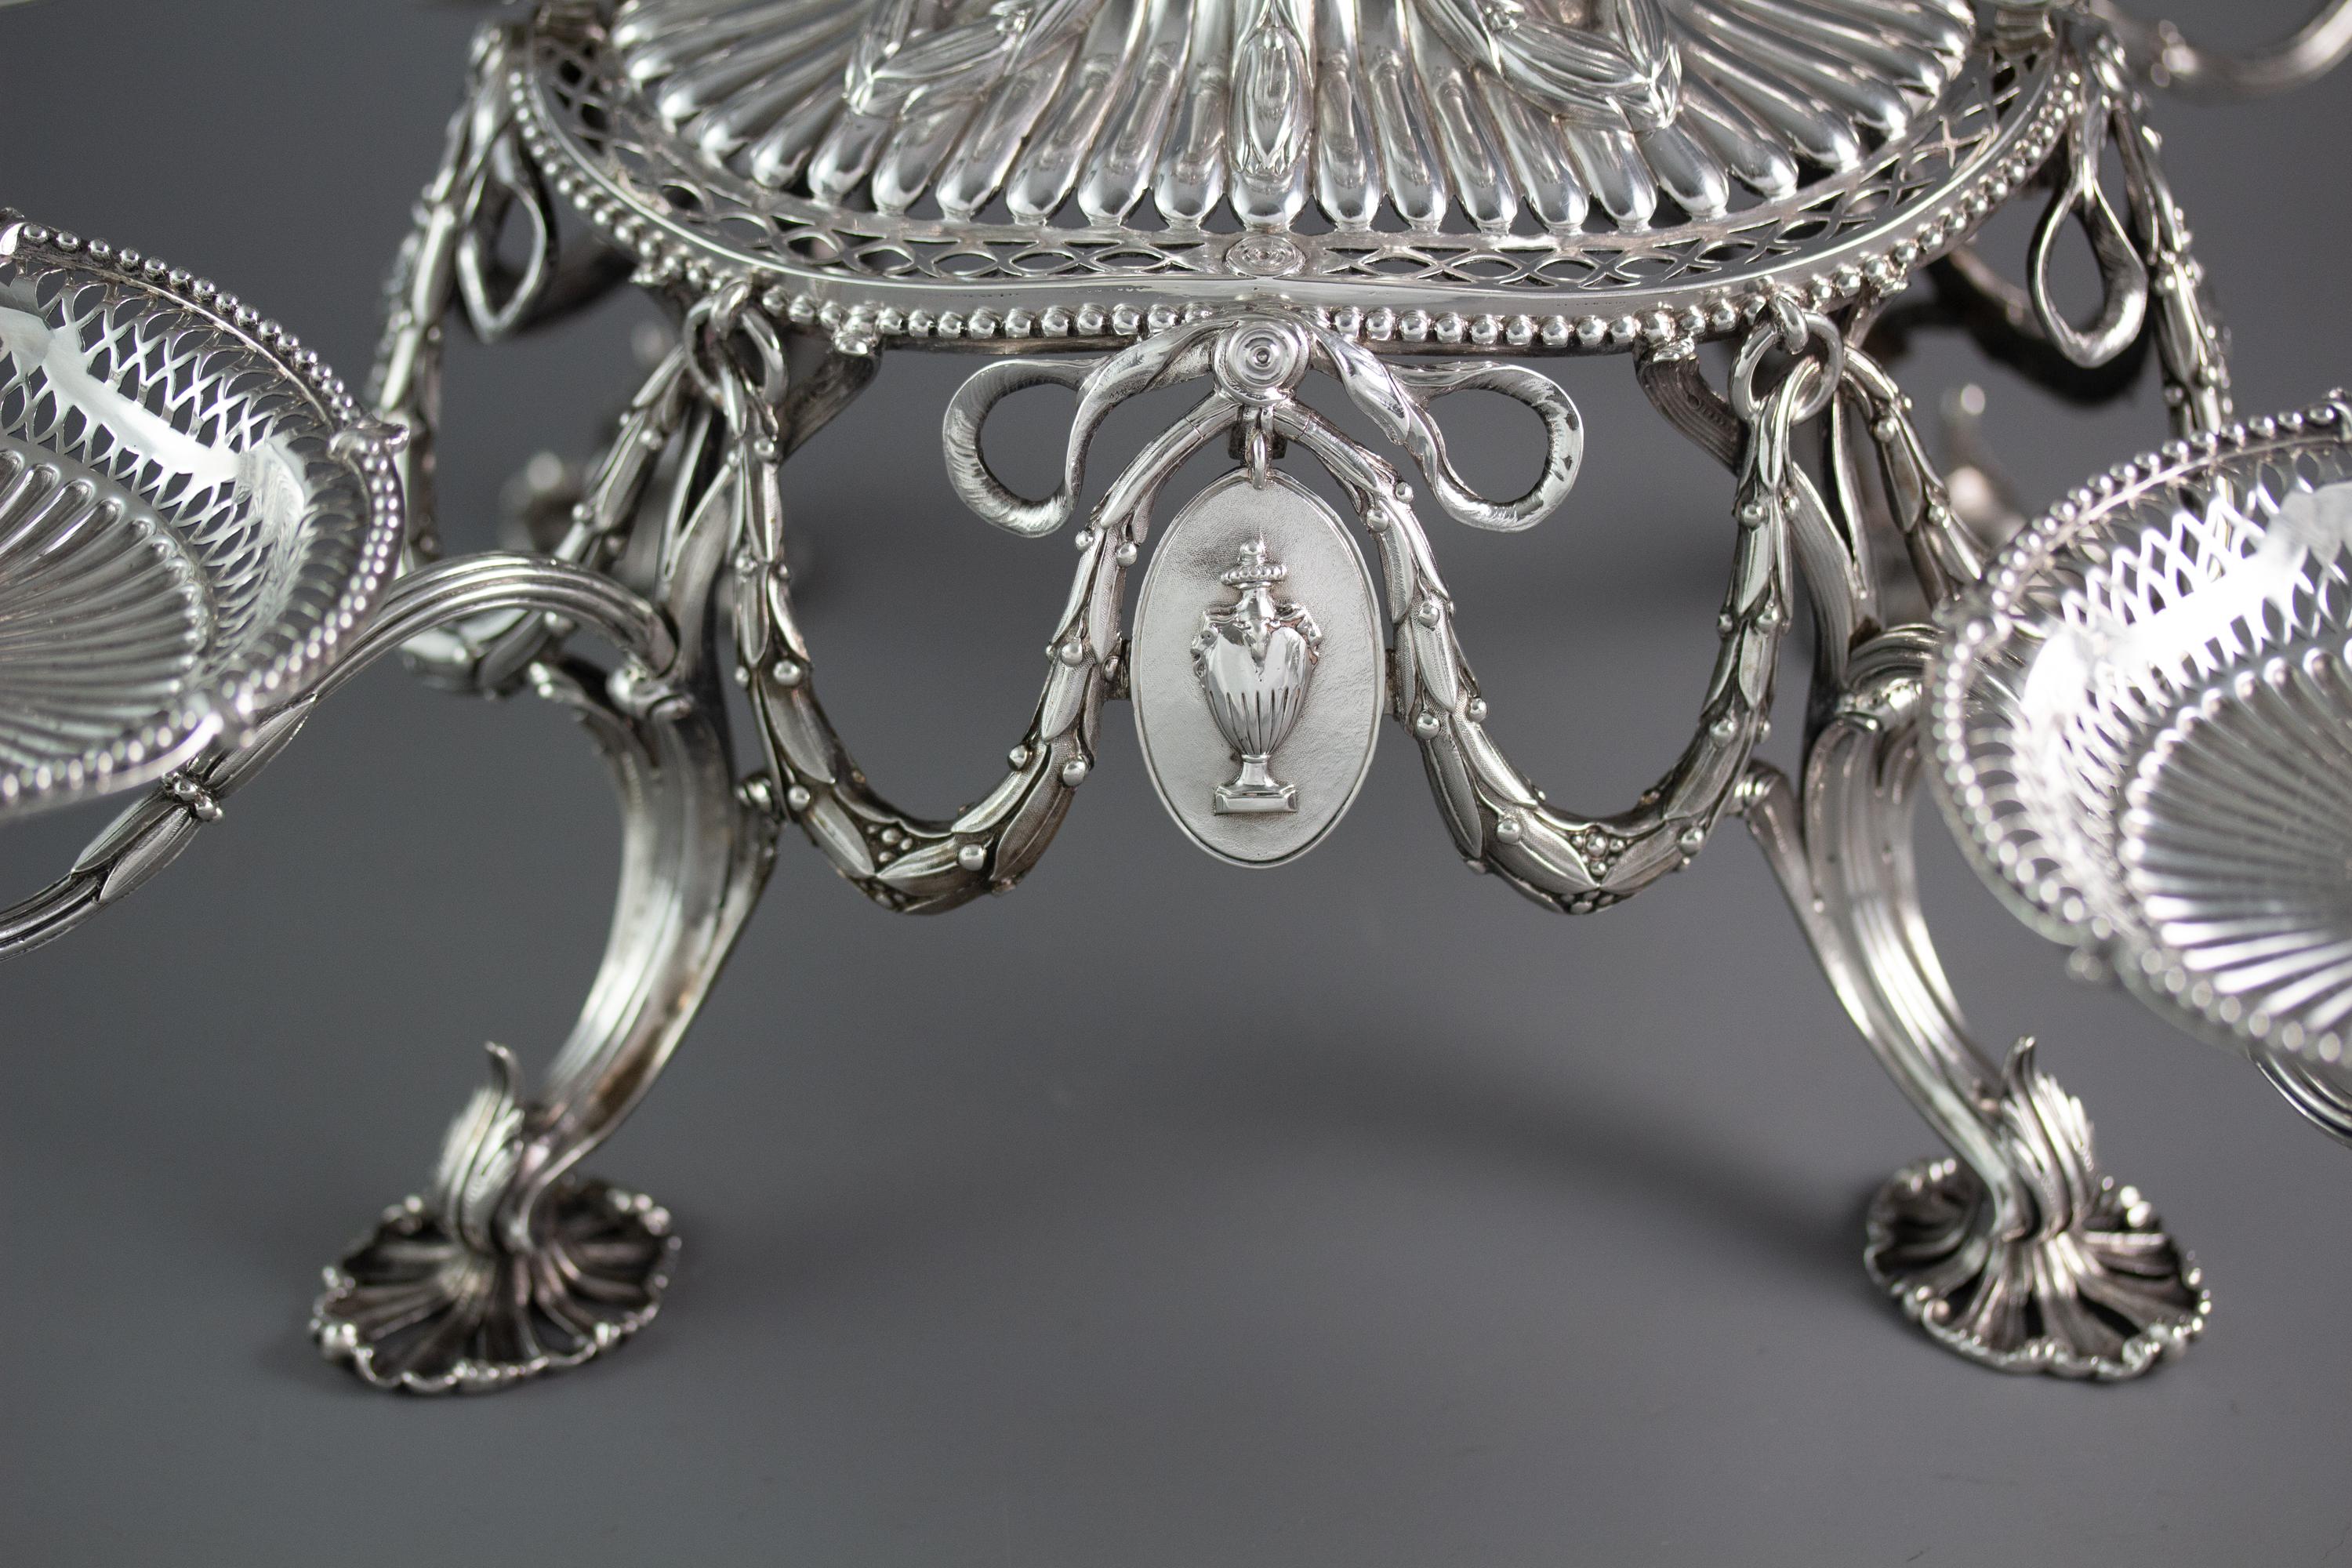 English Silver Epergne or Table Centrepiece, Thomas Pitts, London 1773